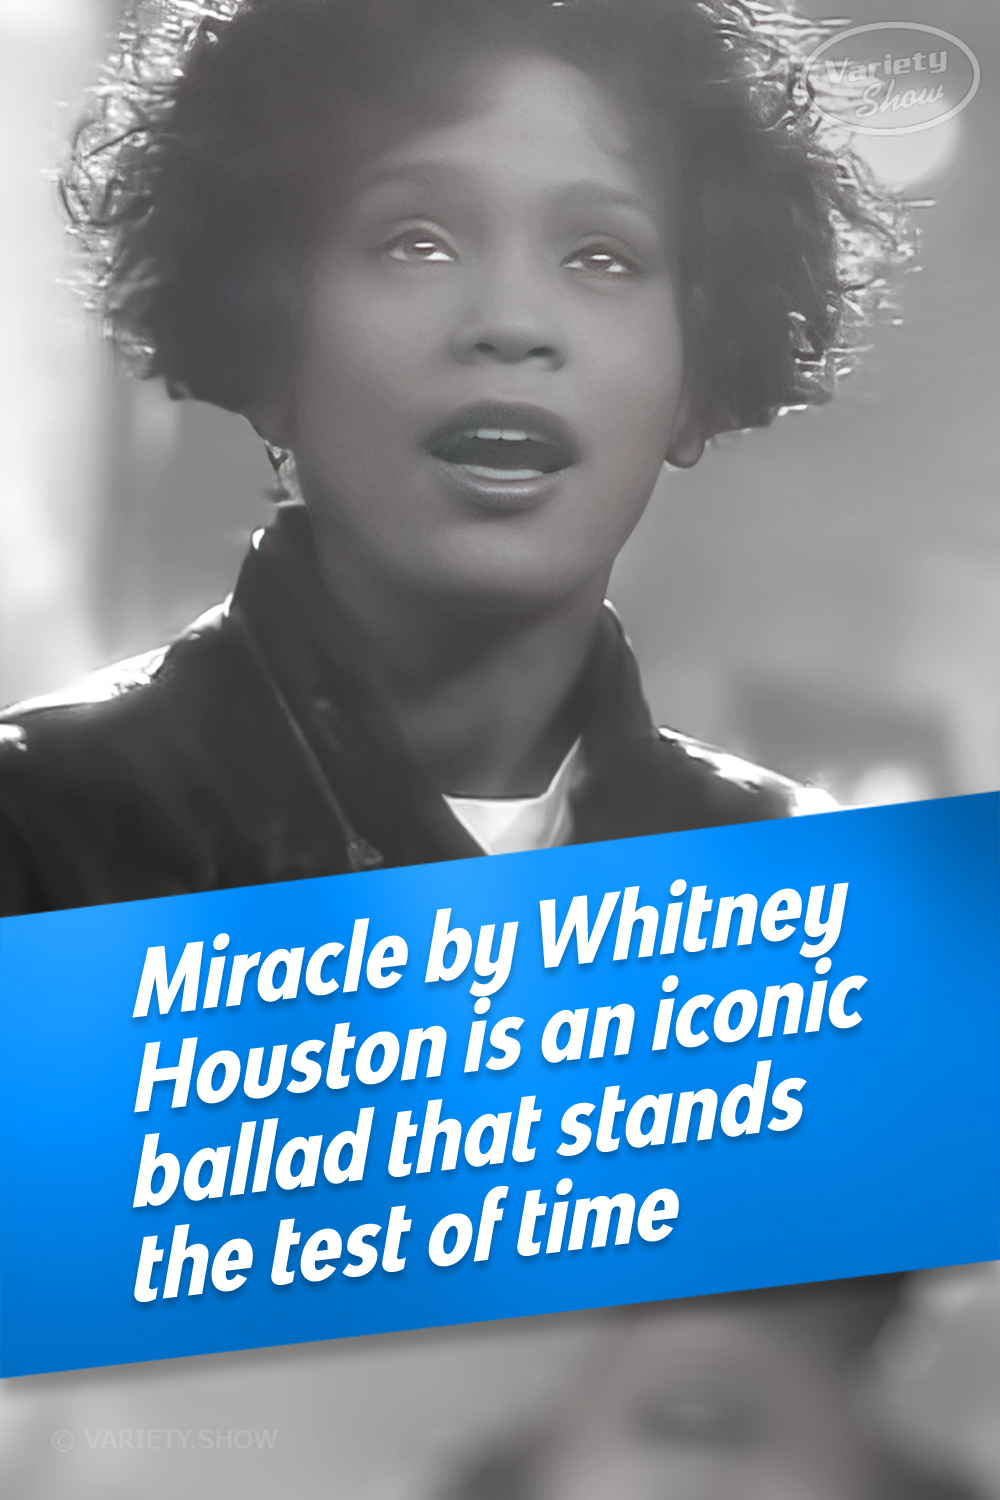 Miracle by Whitney Houston is an iconic ballad that stands the test of time